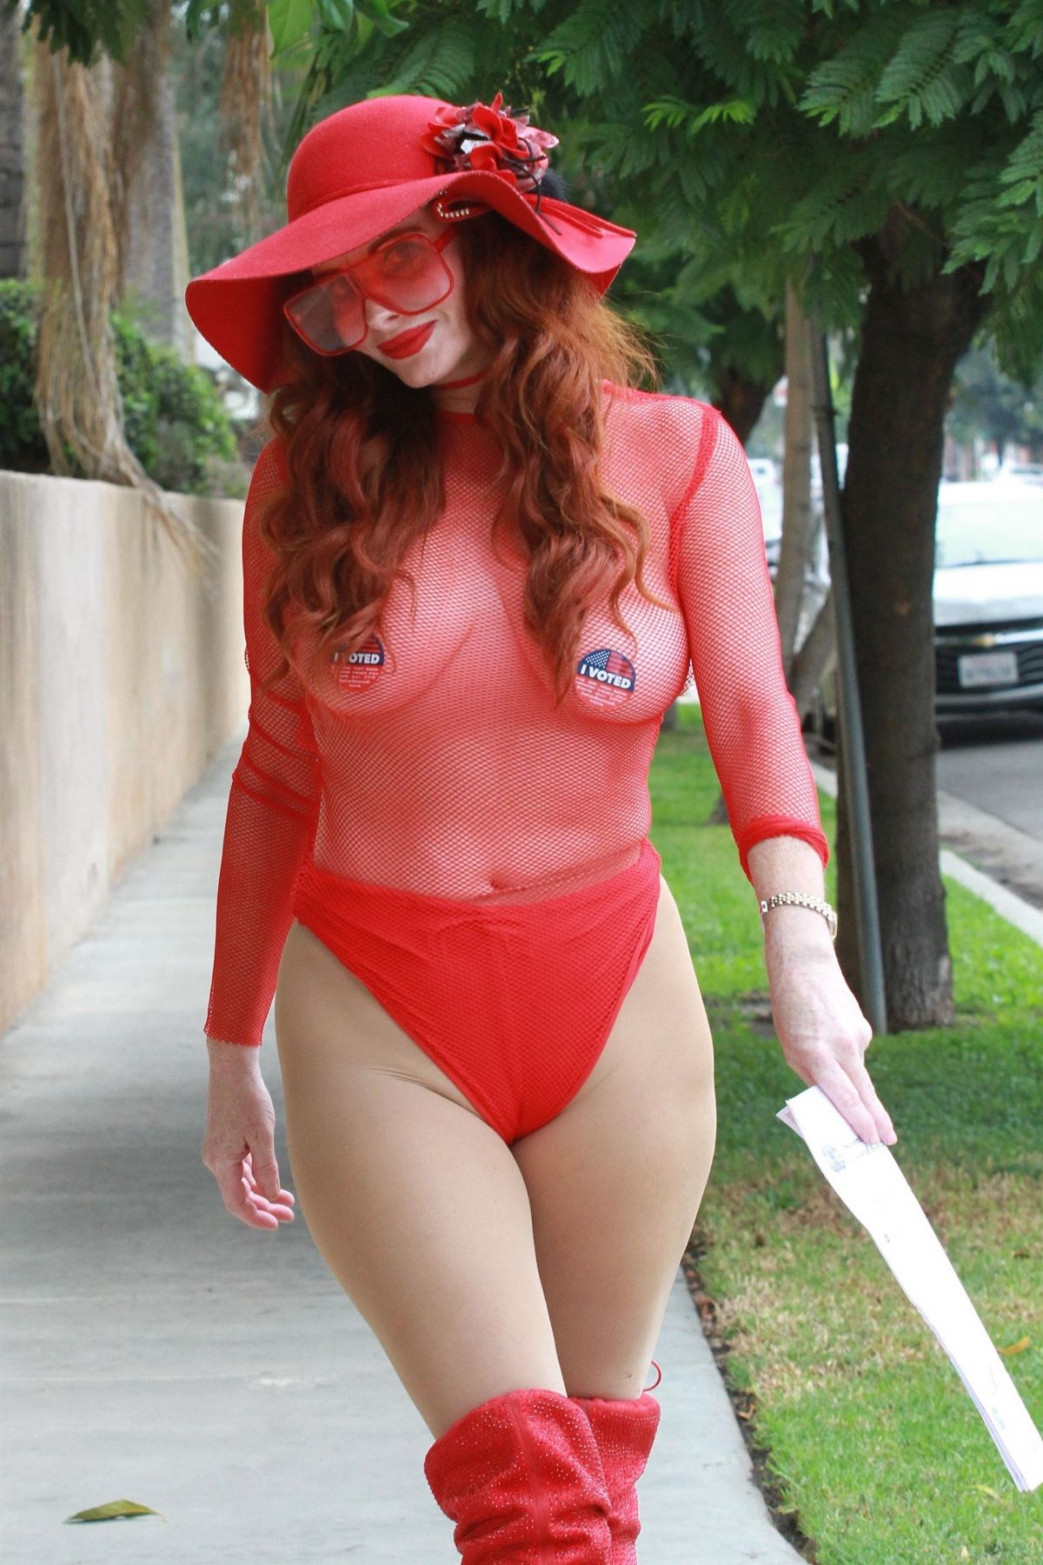 Phoebe-Price-Cameltoe-In-Red-See-Thru-Outfit-2.jpg